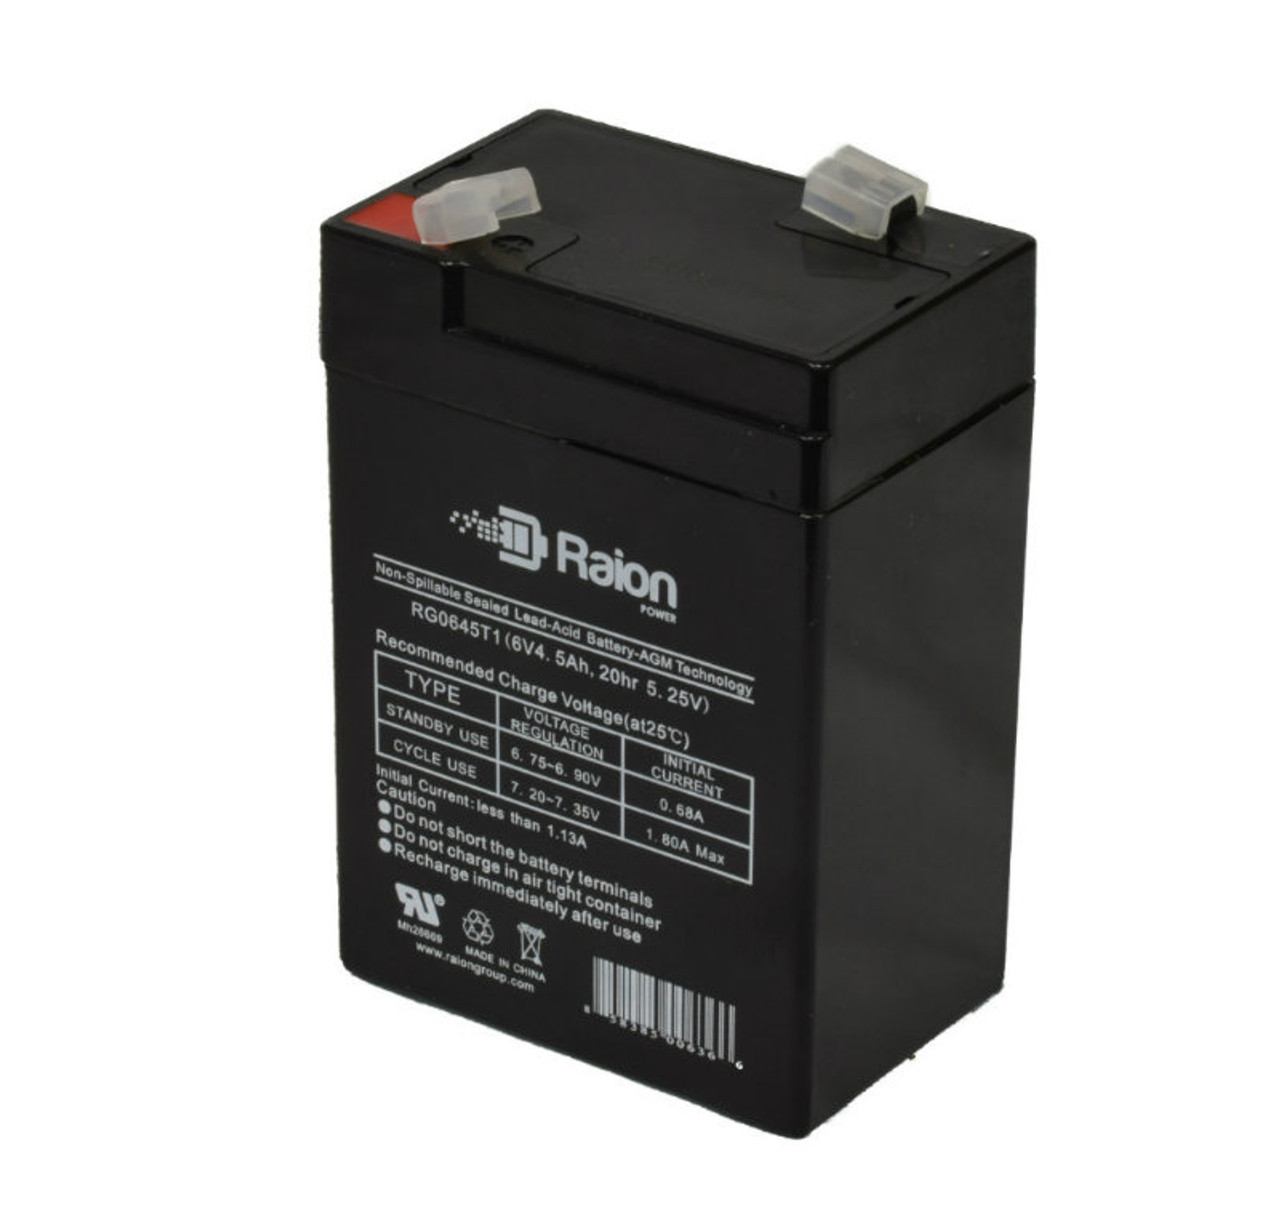 Raion Power RG0645T1 6V 4.5Ah Replacement Battery Cartridge for Arjo-Century SARA Plus Standing Aid